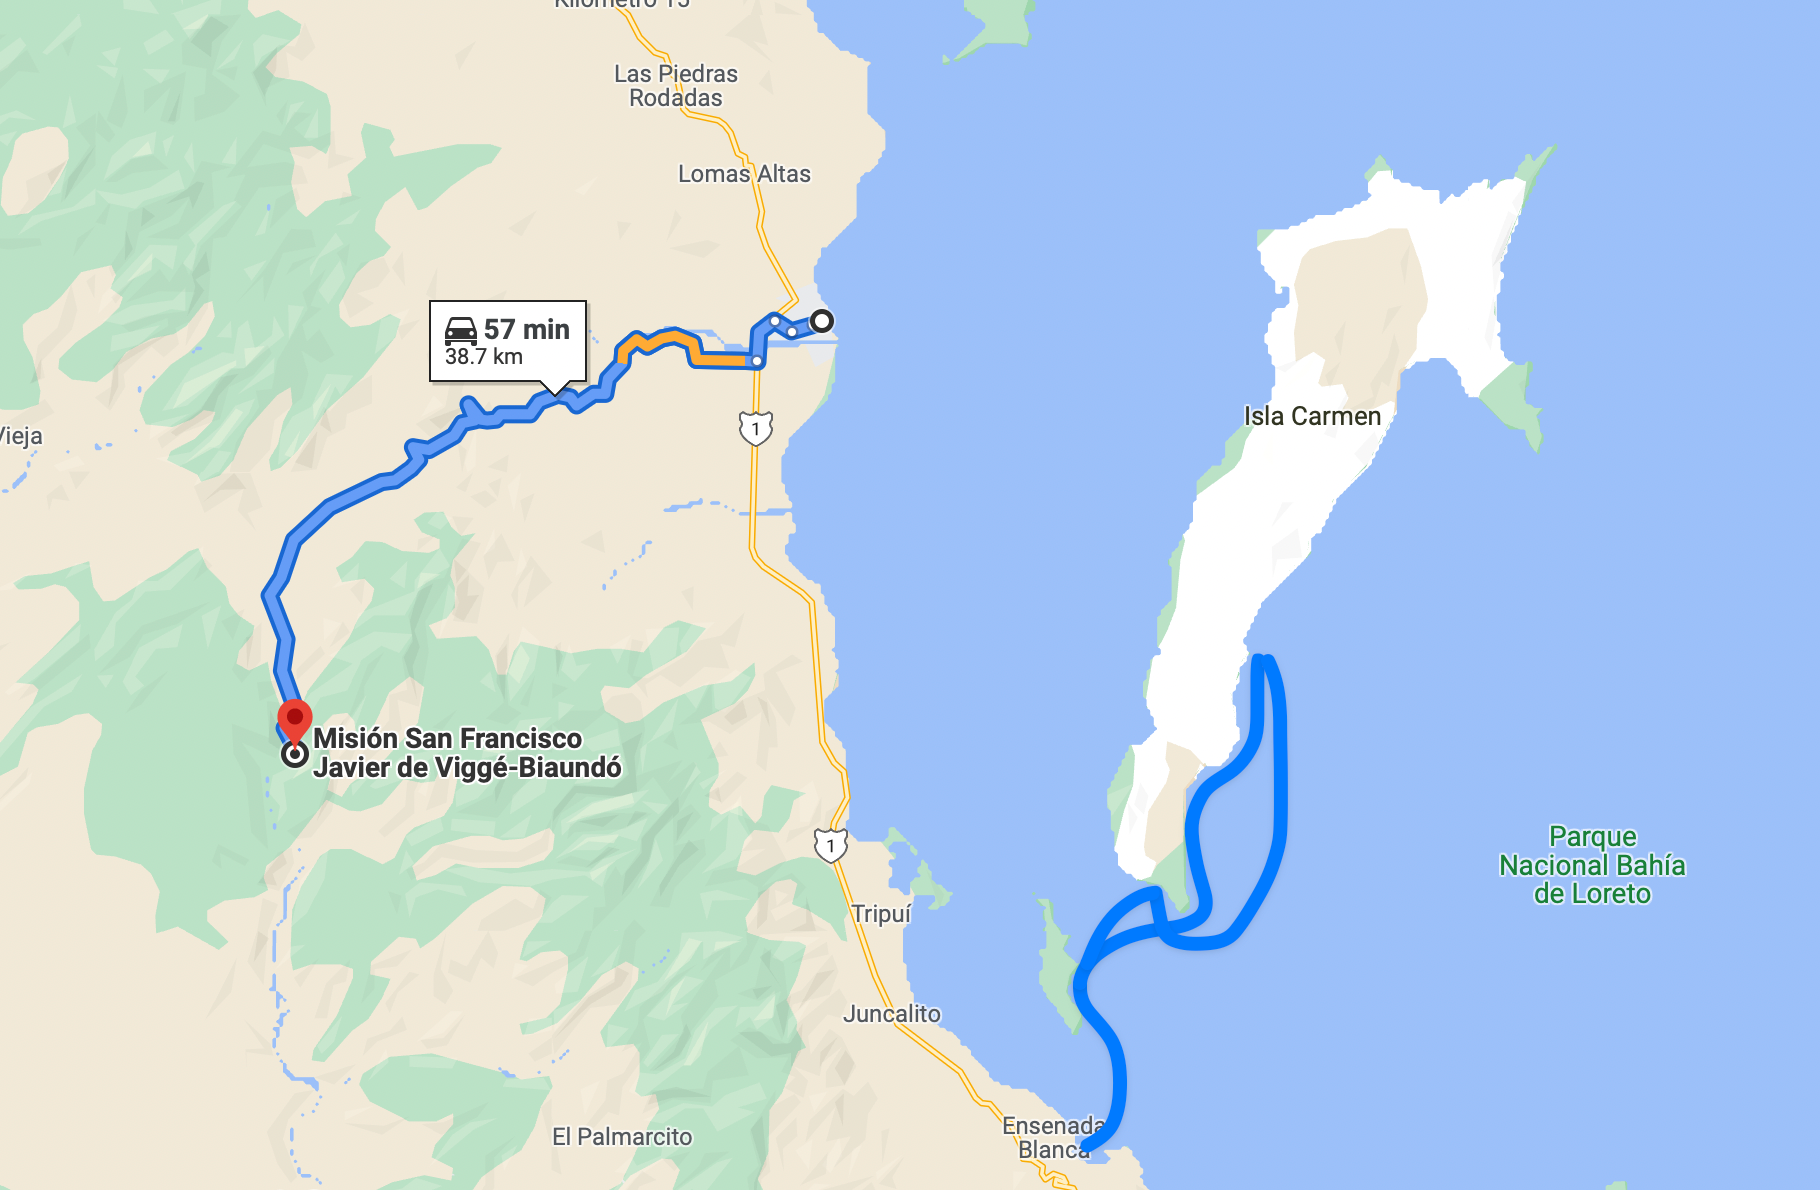 Our very short driving route for this seventh week in Baja, with the approximate kayaking route to Isla Danzante and Isla Carmen located just east of Loreto.